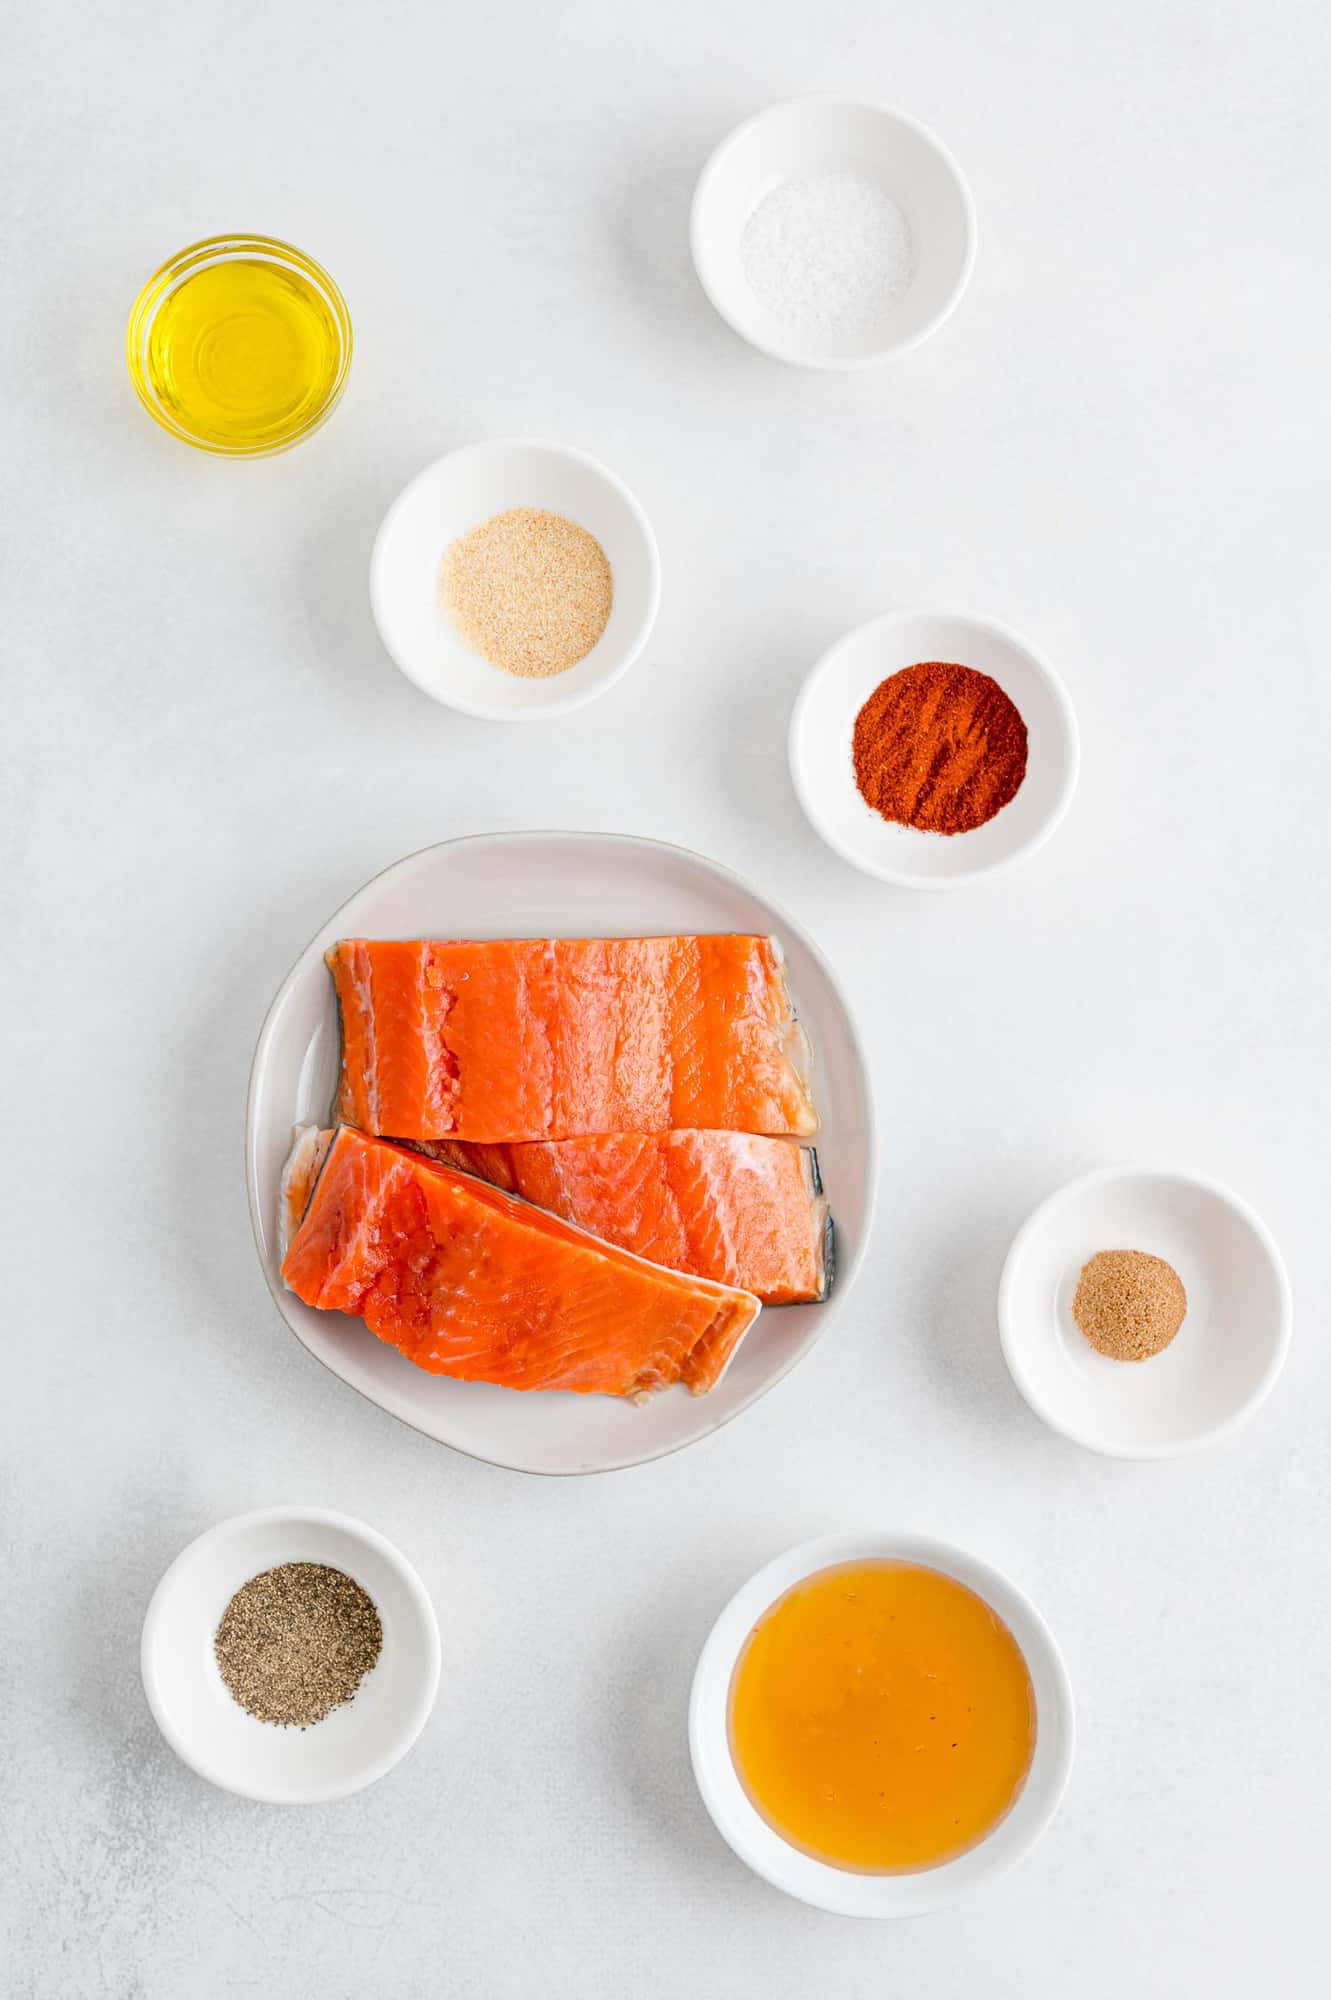 Ingredients in separate dishes, including salmon.